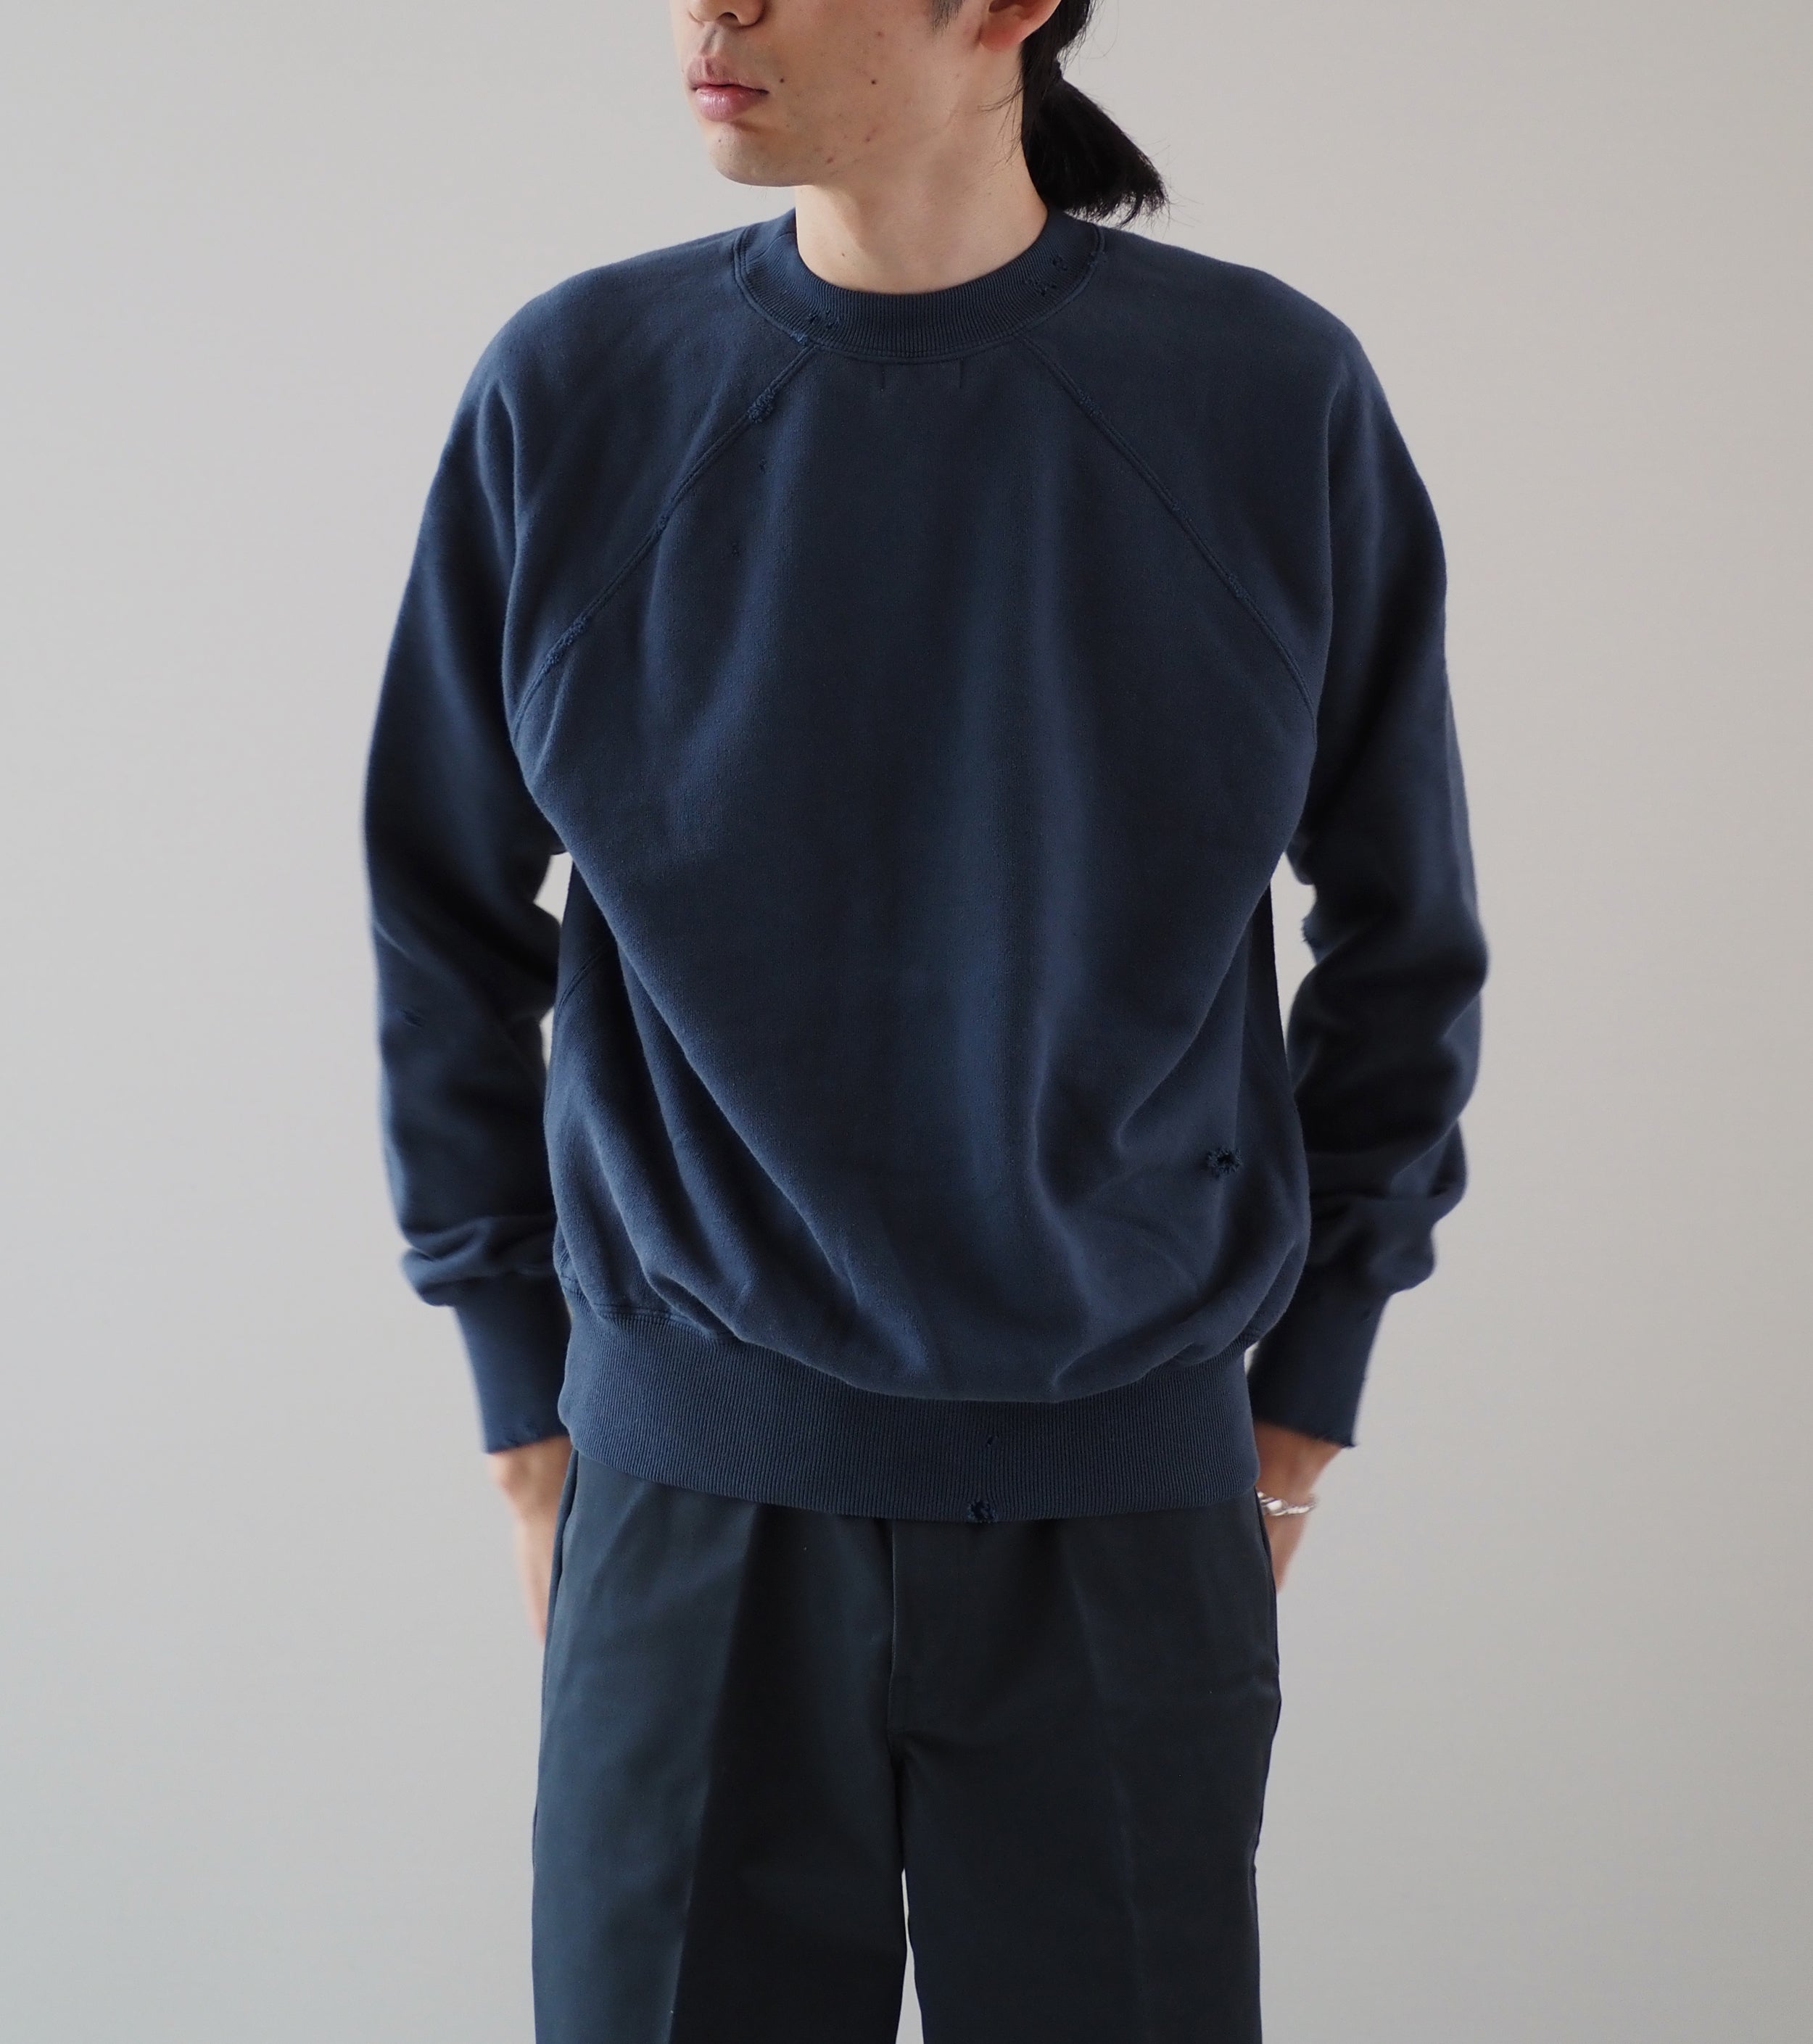 MAATEE＆SONS ヴィンテージ スウェット , 掠れ Navy